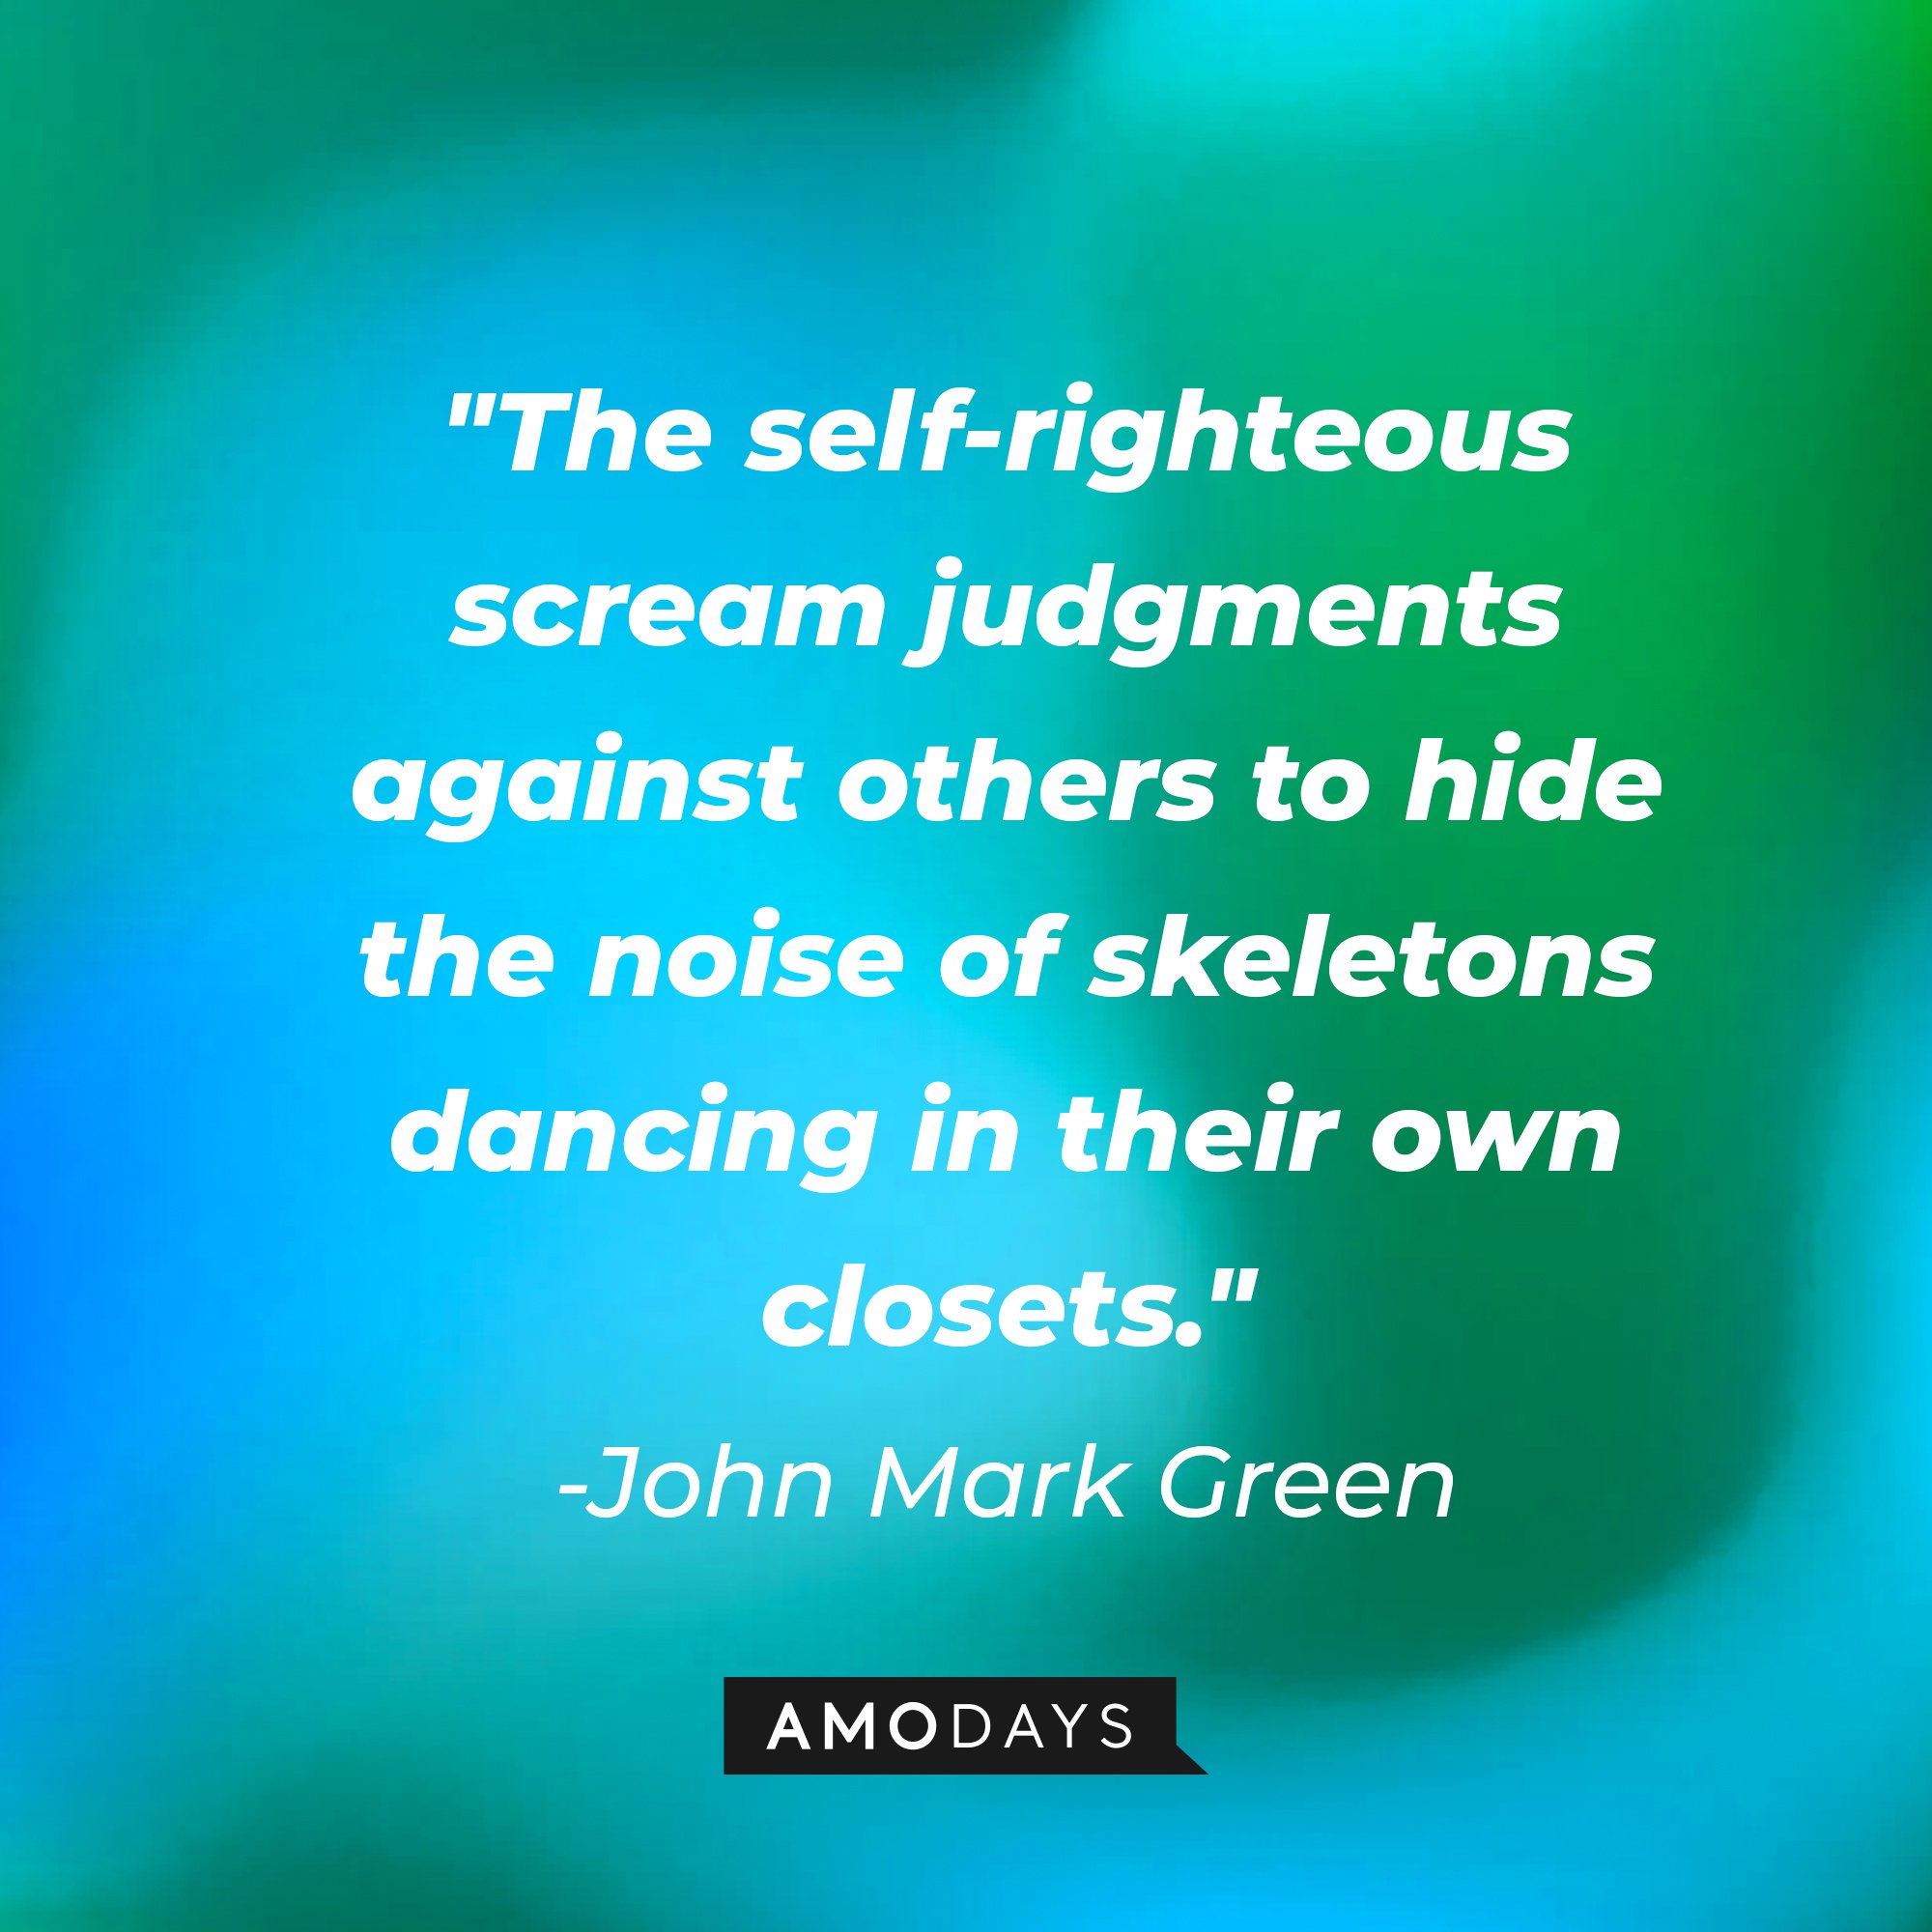 John Mark Green's quote:\\\\\\\\\\\\\\\\u00a0"The self-righteous scream judgments against others to hide the noise of skeletons dancing in their own closets."\\\\\\\\\\\\\\\\u00a0| Image: AmoDays